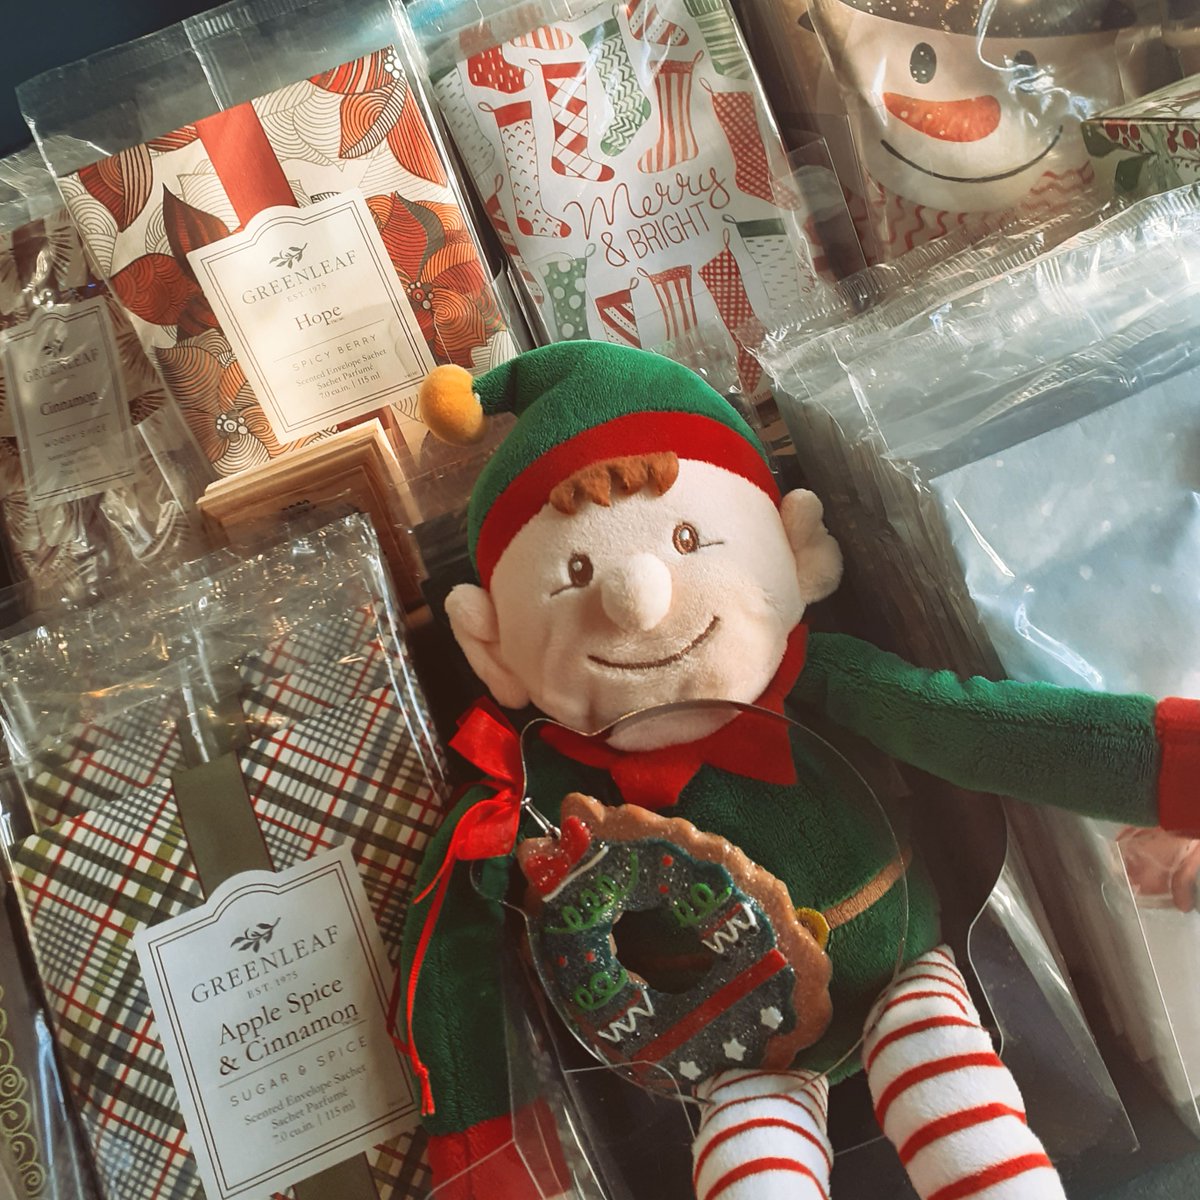 Elfred did some baking yesterday. It sure looks good!
#theoldechristmasshoppe #advent #22 #christmas #elf